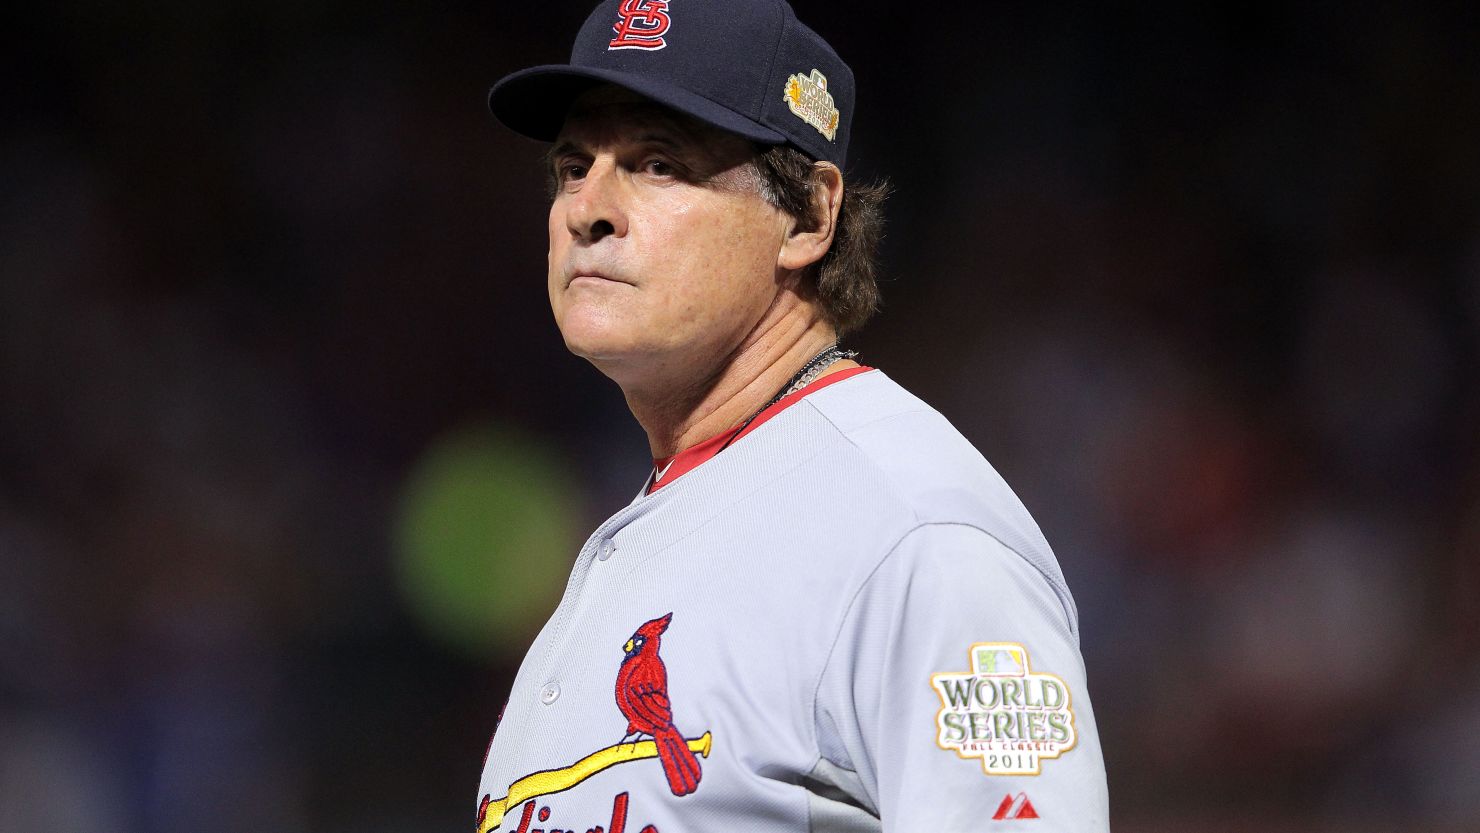 Tony La Russa on his retirement: "It's just time to do something else." 